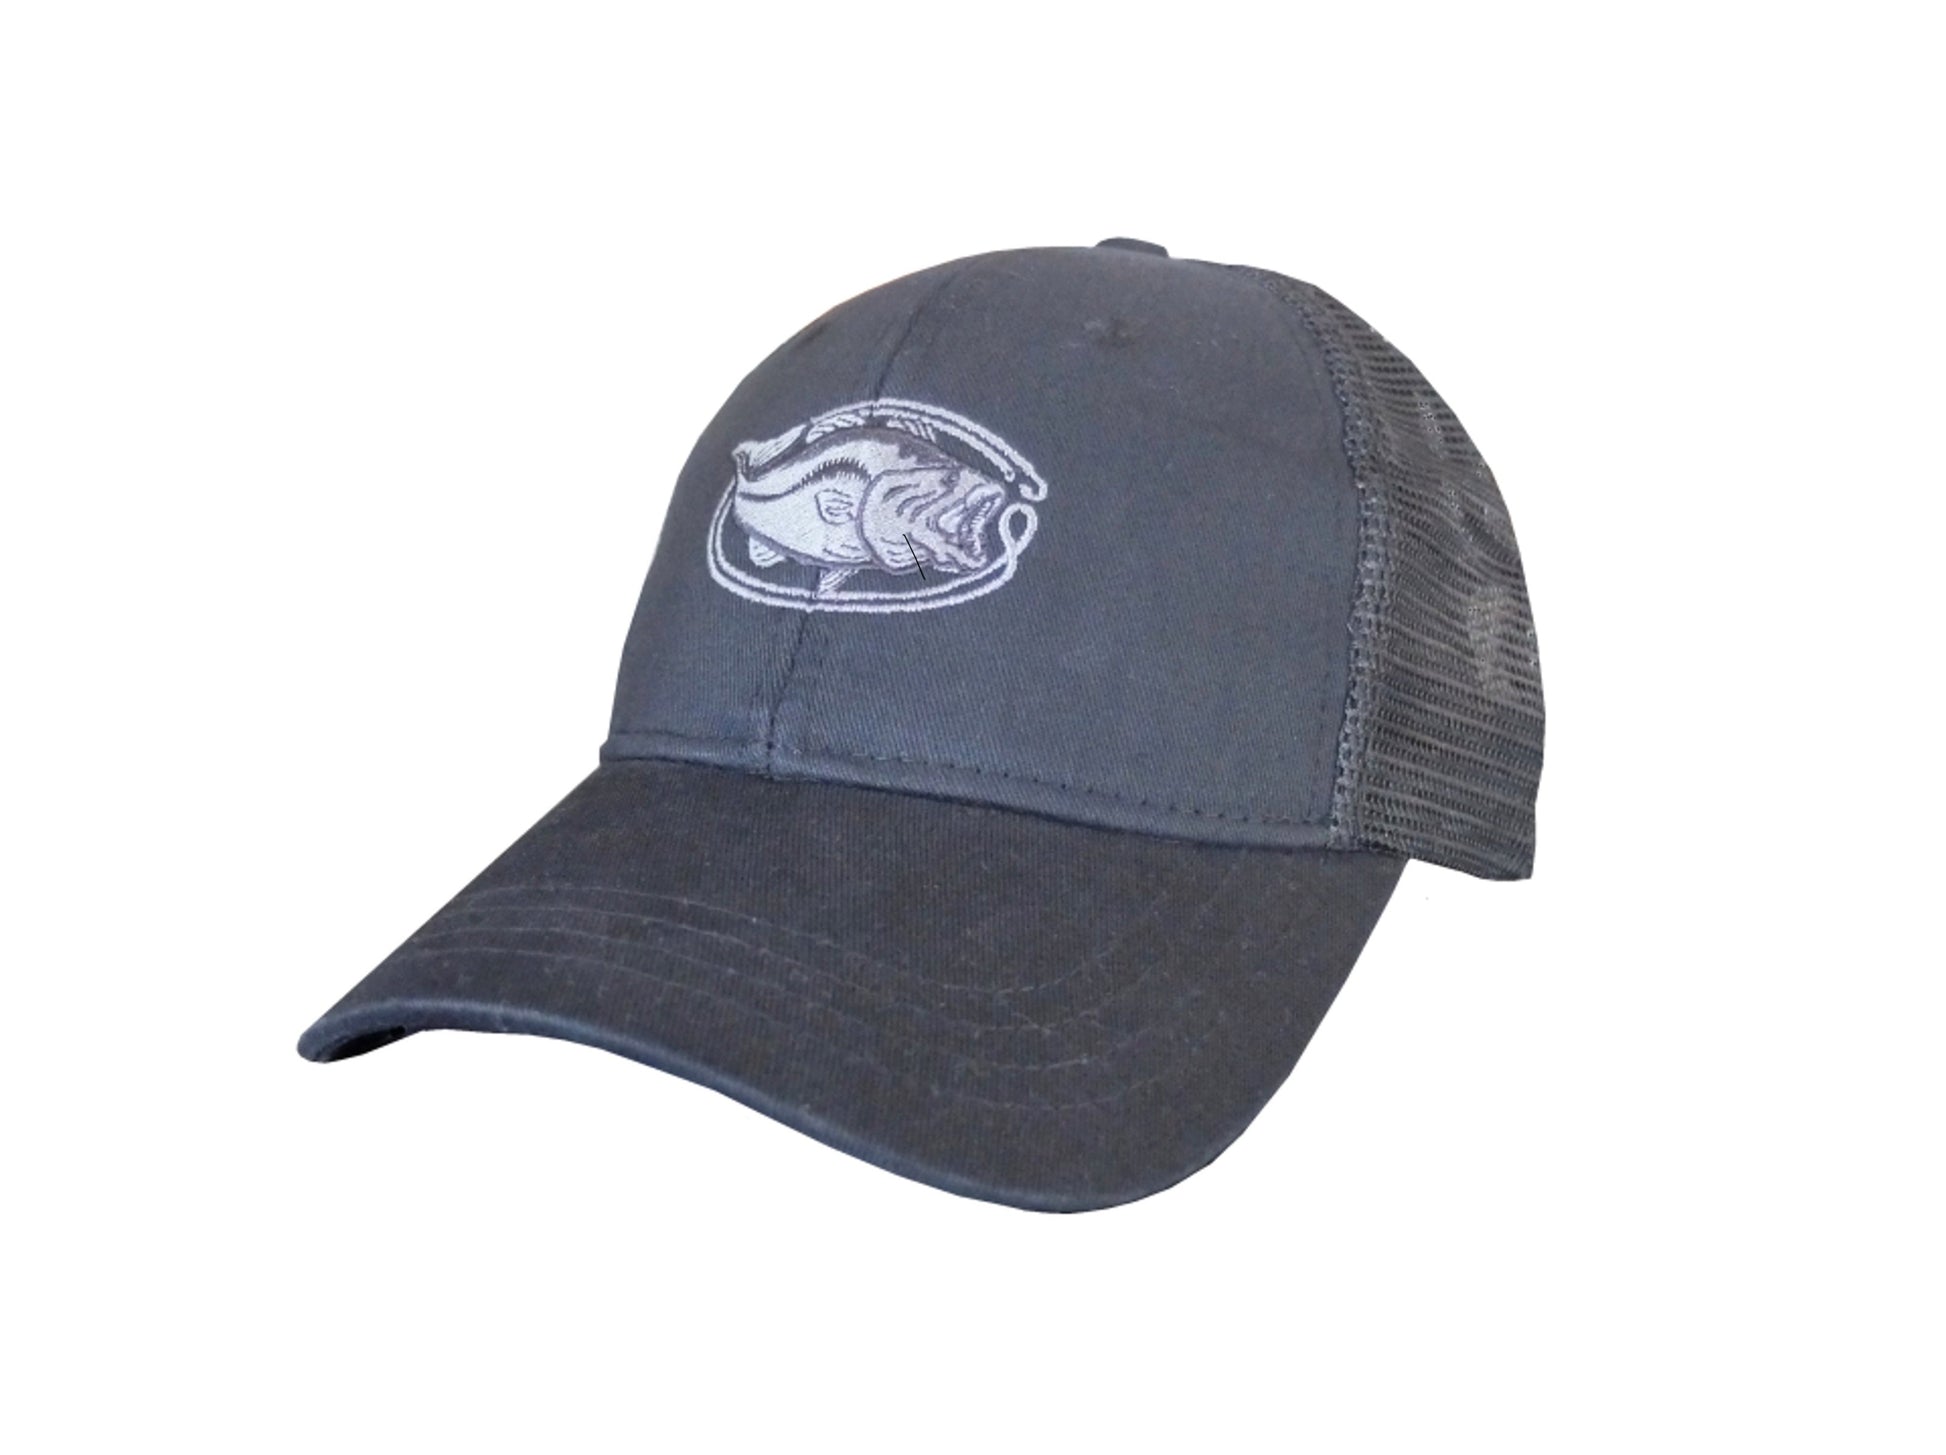 washed black trucker cap with pewter grey and black embroidered largemouth bass decoration